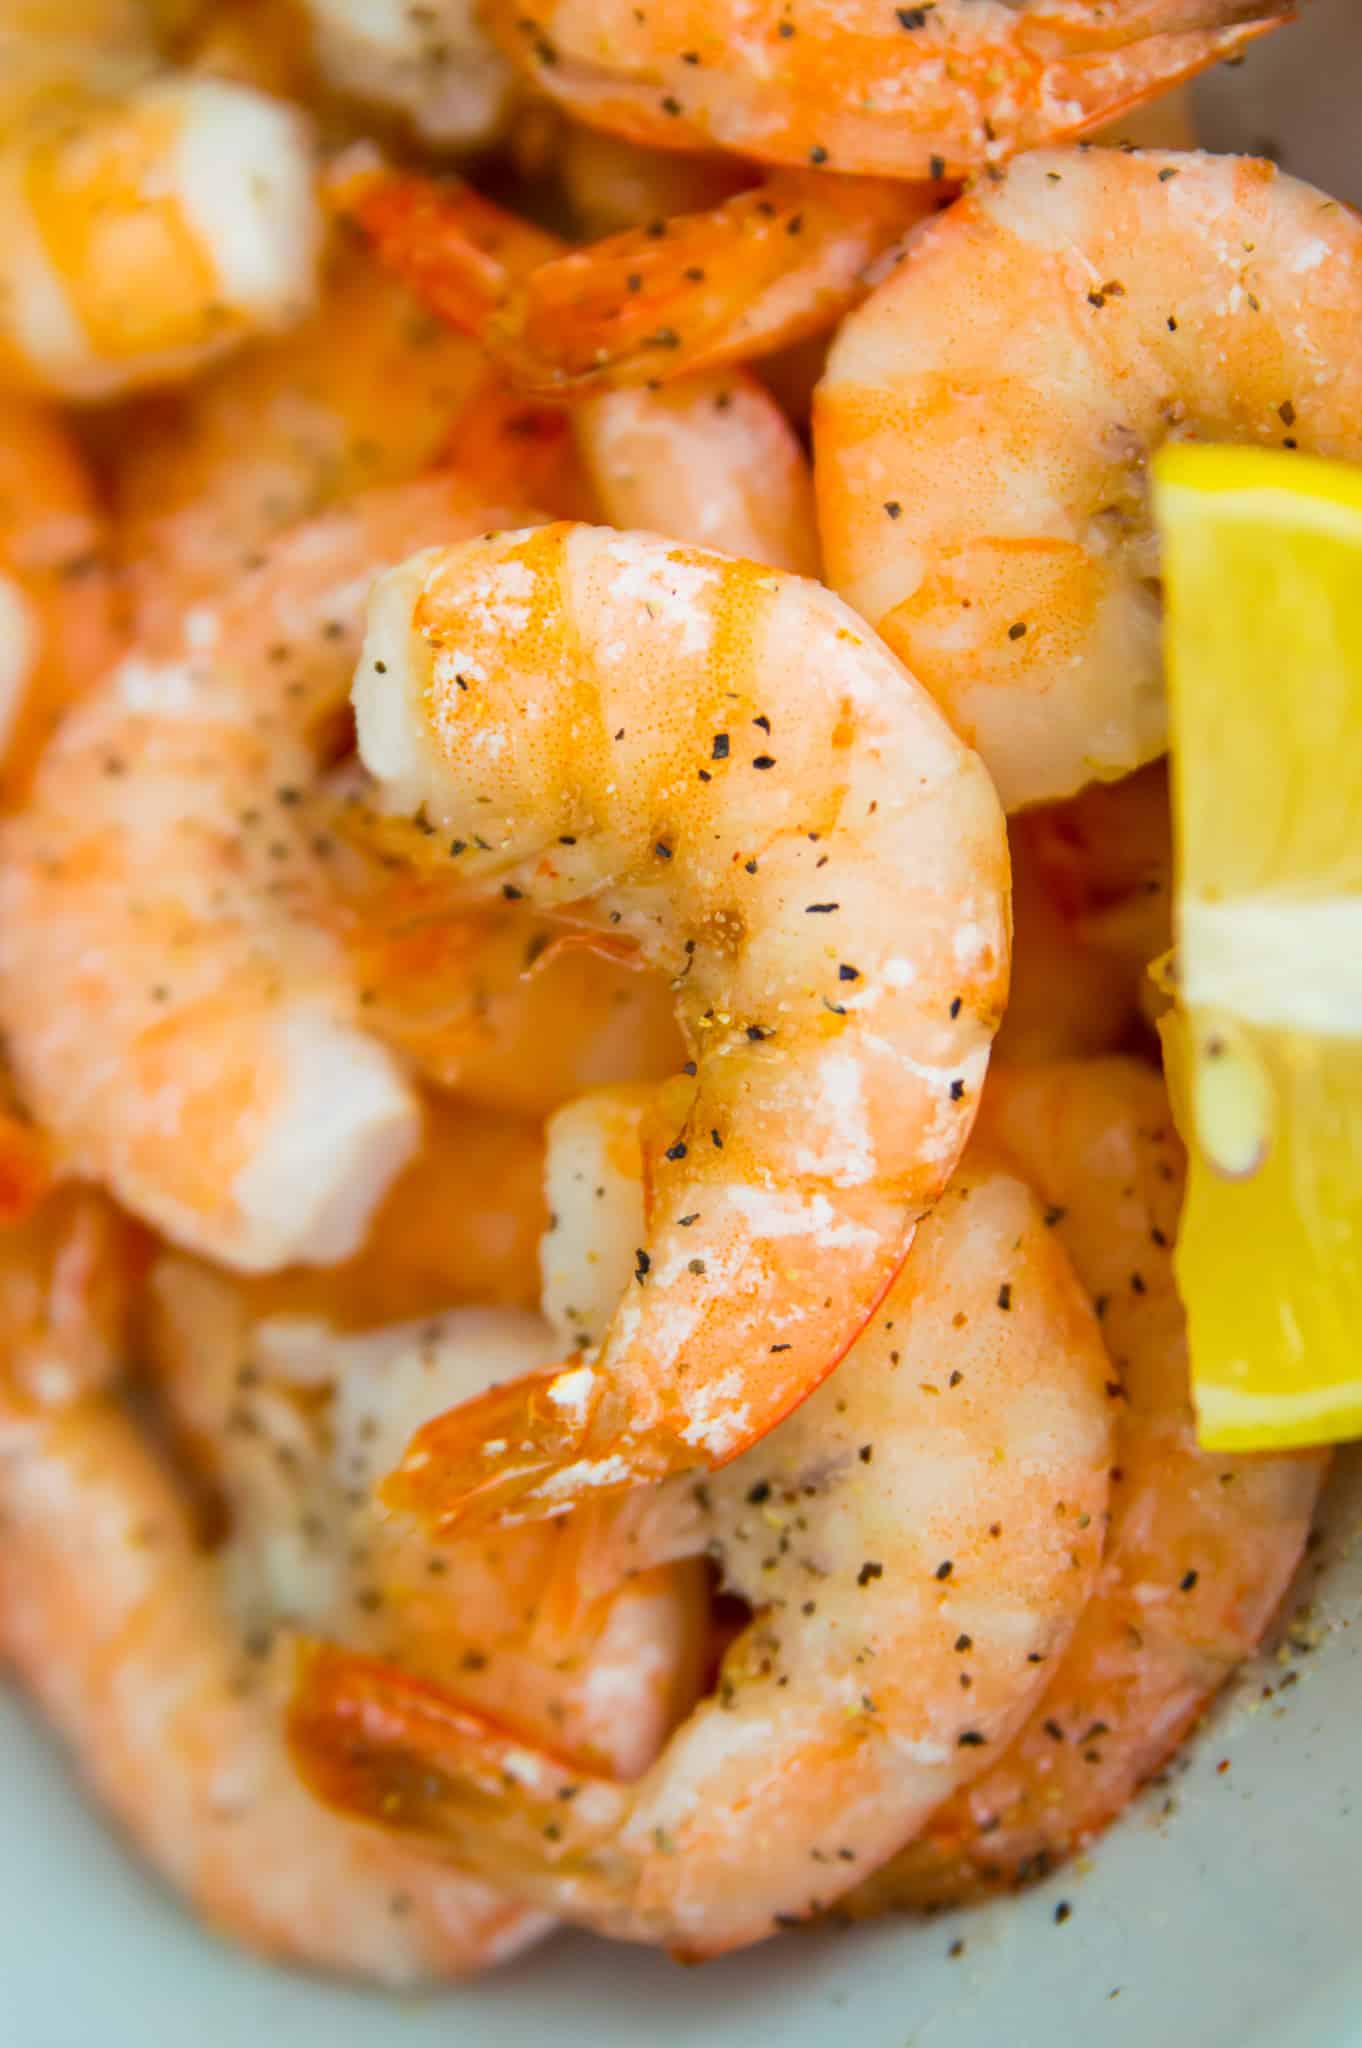 Cooked shrimp in a bowl with lemon slices.